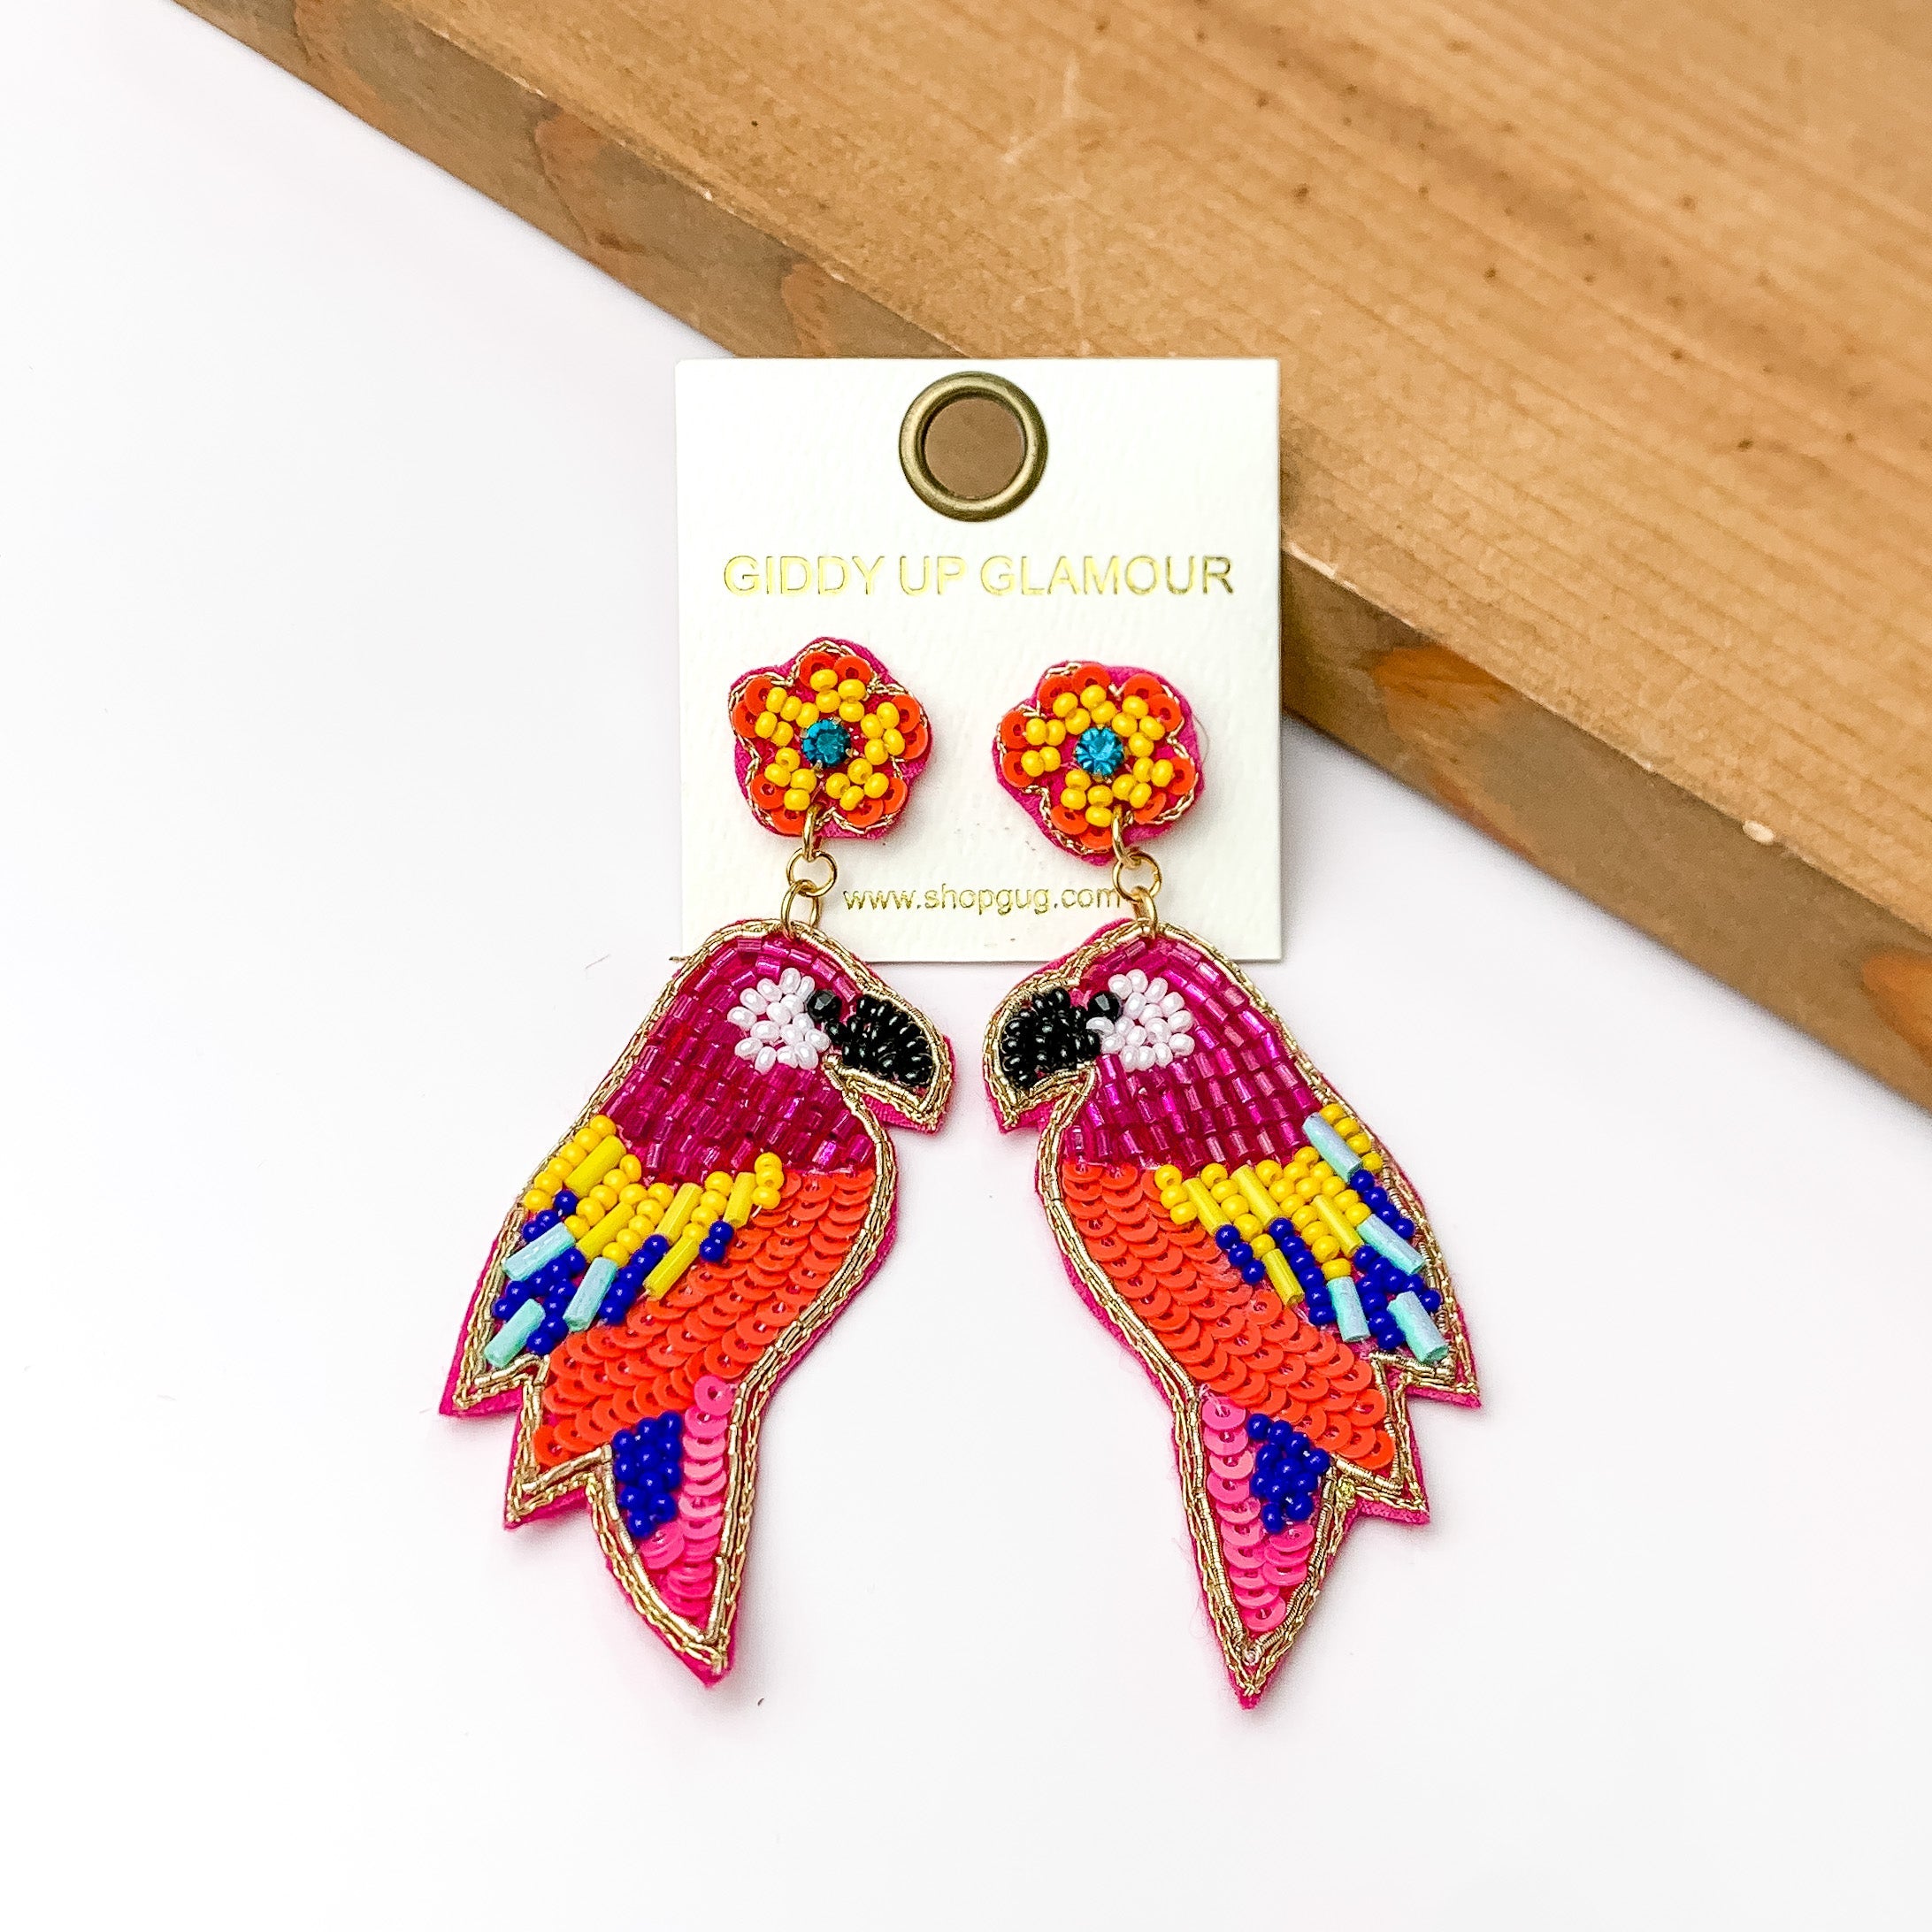 These parrot earrings are pink with beads that are yellow, turquoise, and royal blue. They do have seqence that are pink and orange. These earrings are pictured in front of a piece of wood with a white background.